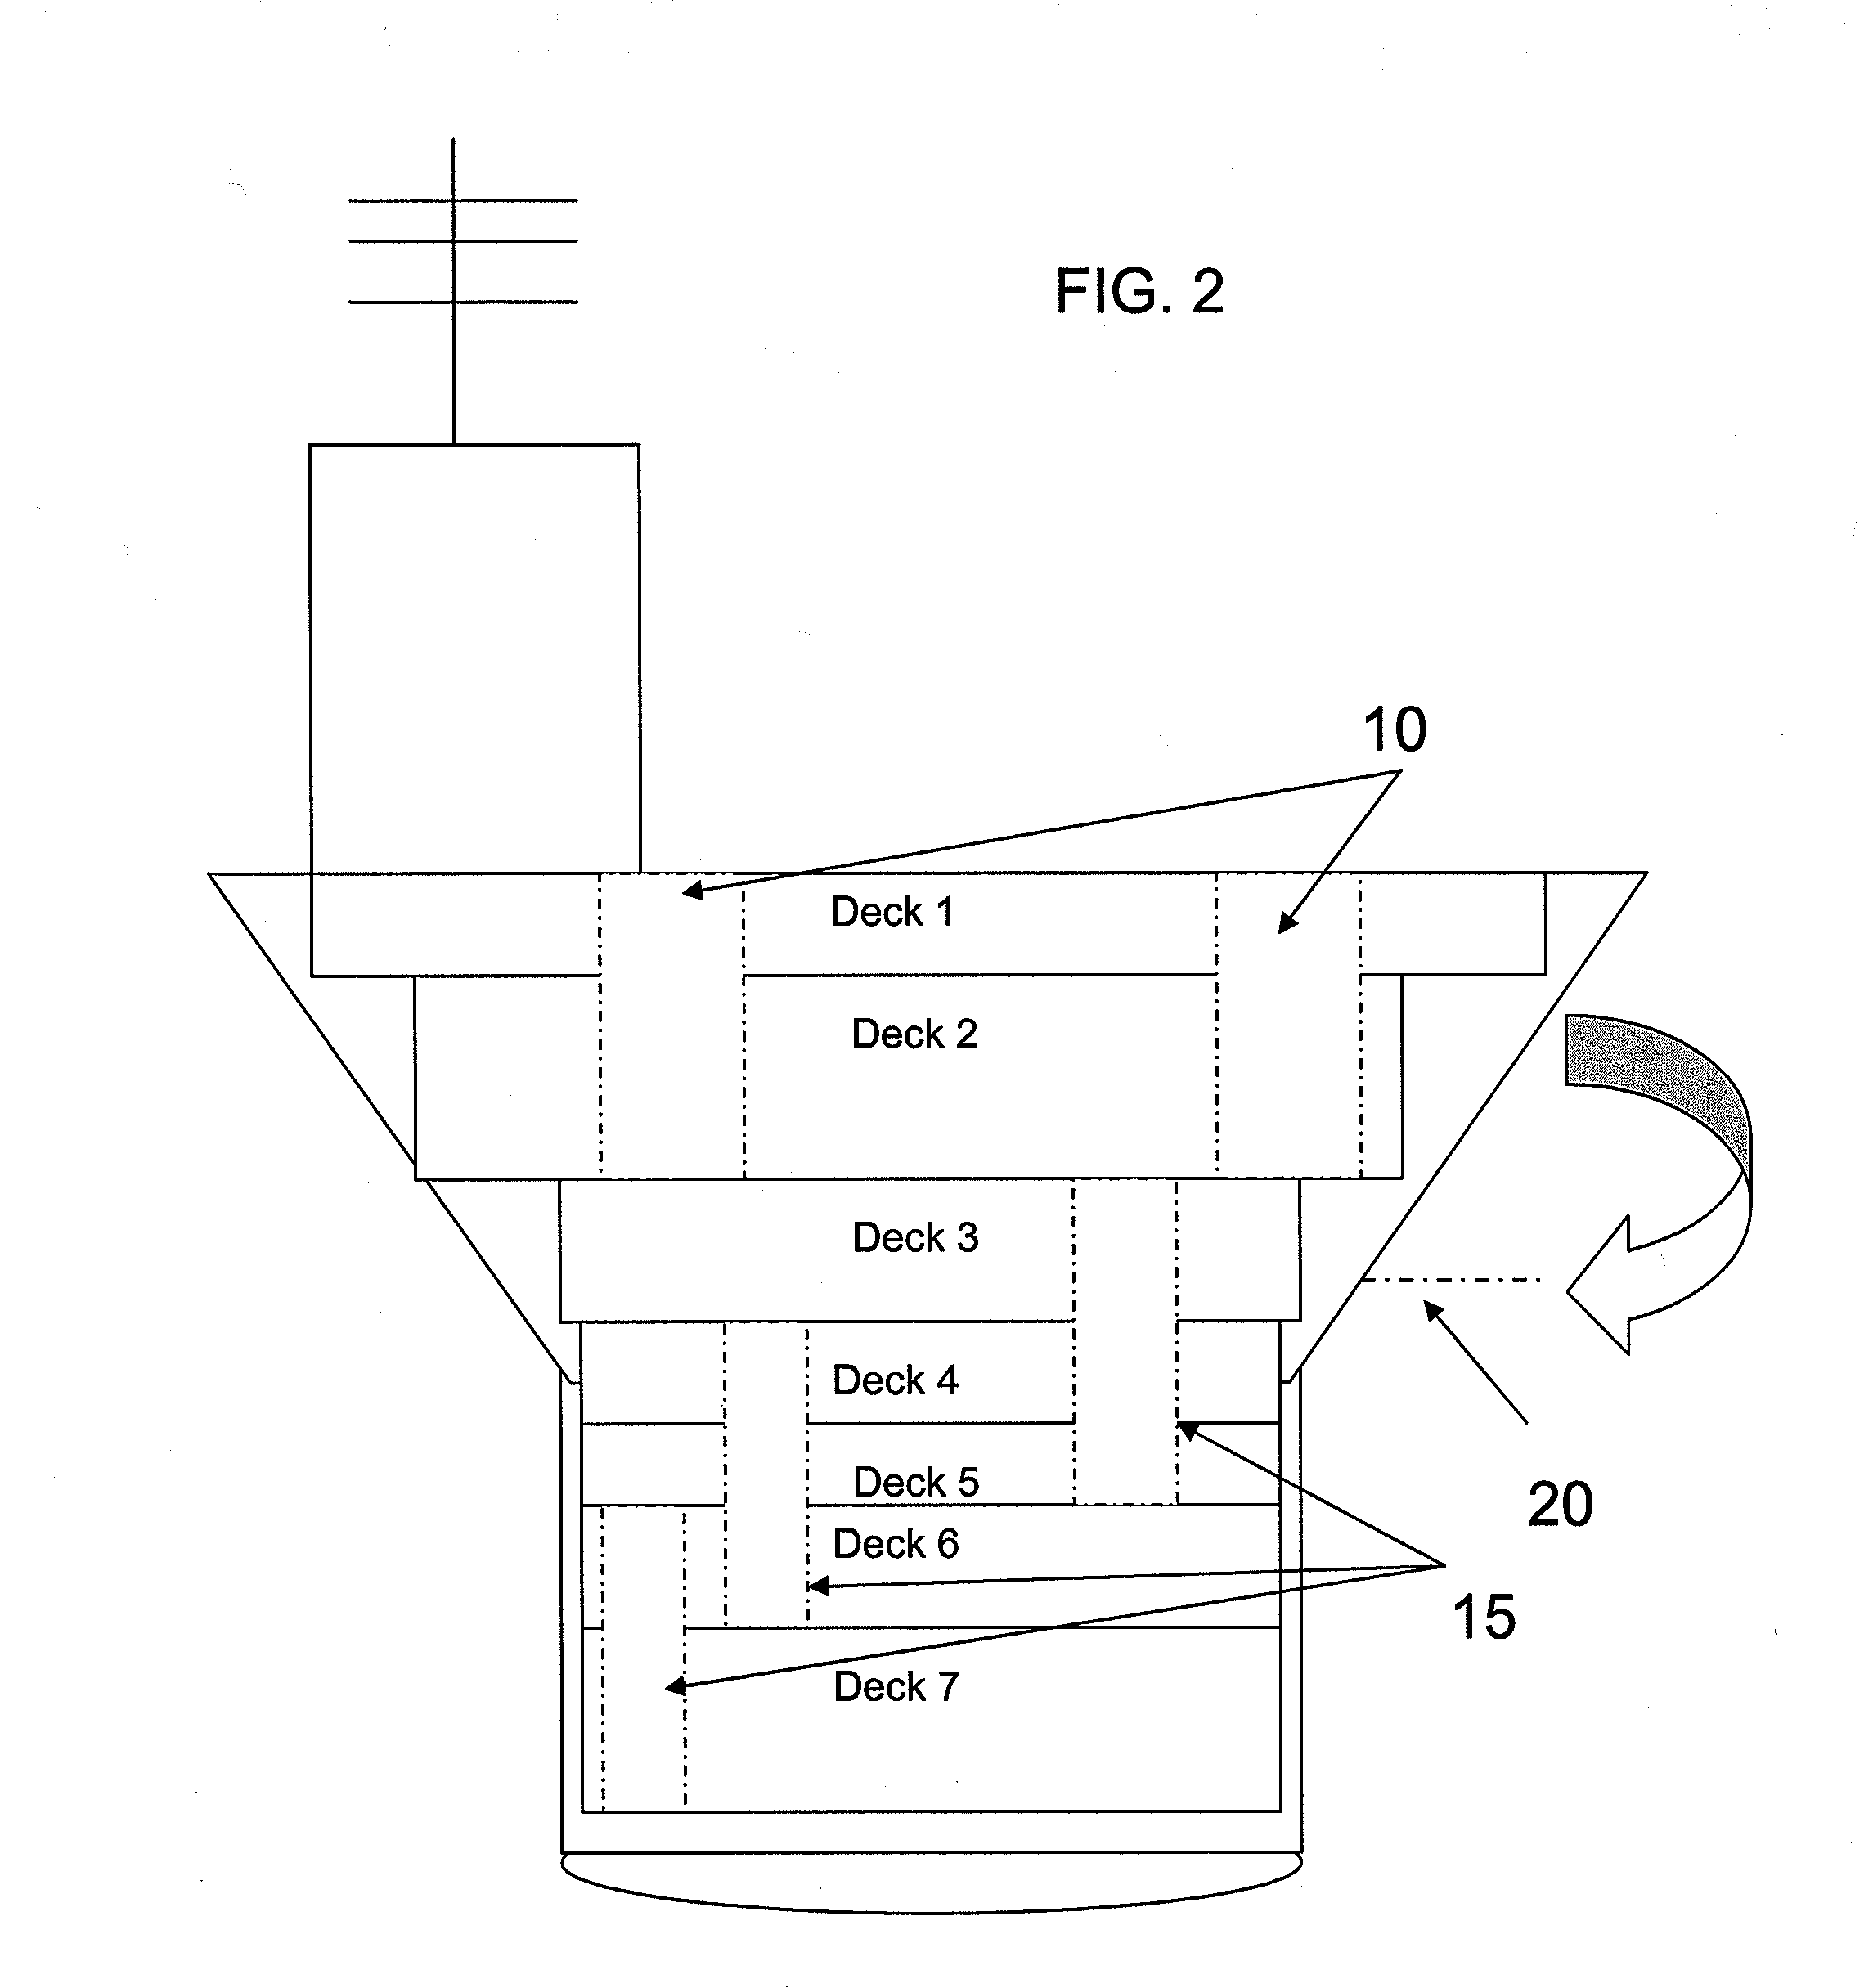 Control and tracking system for material movement system and method of use